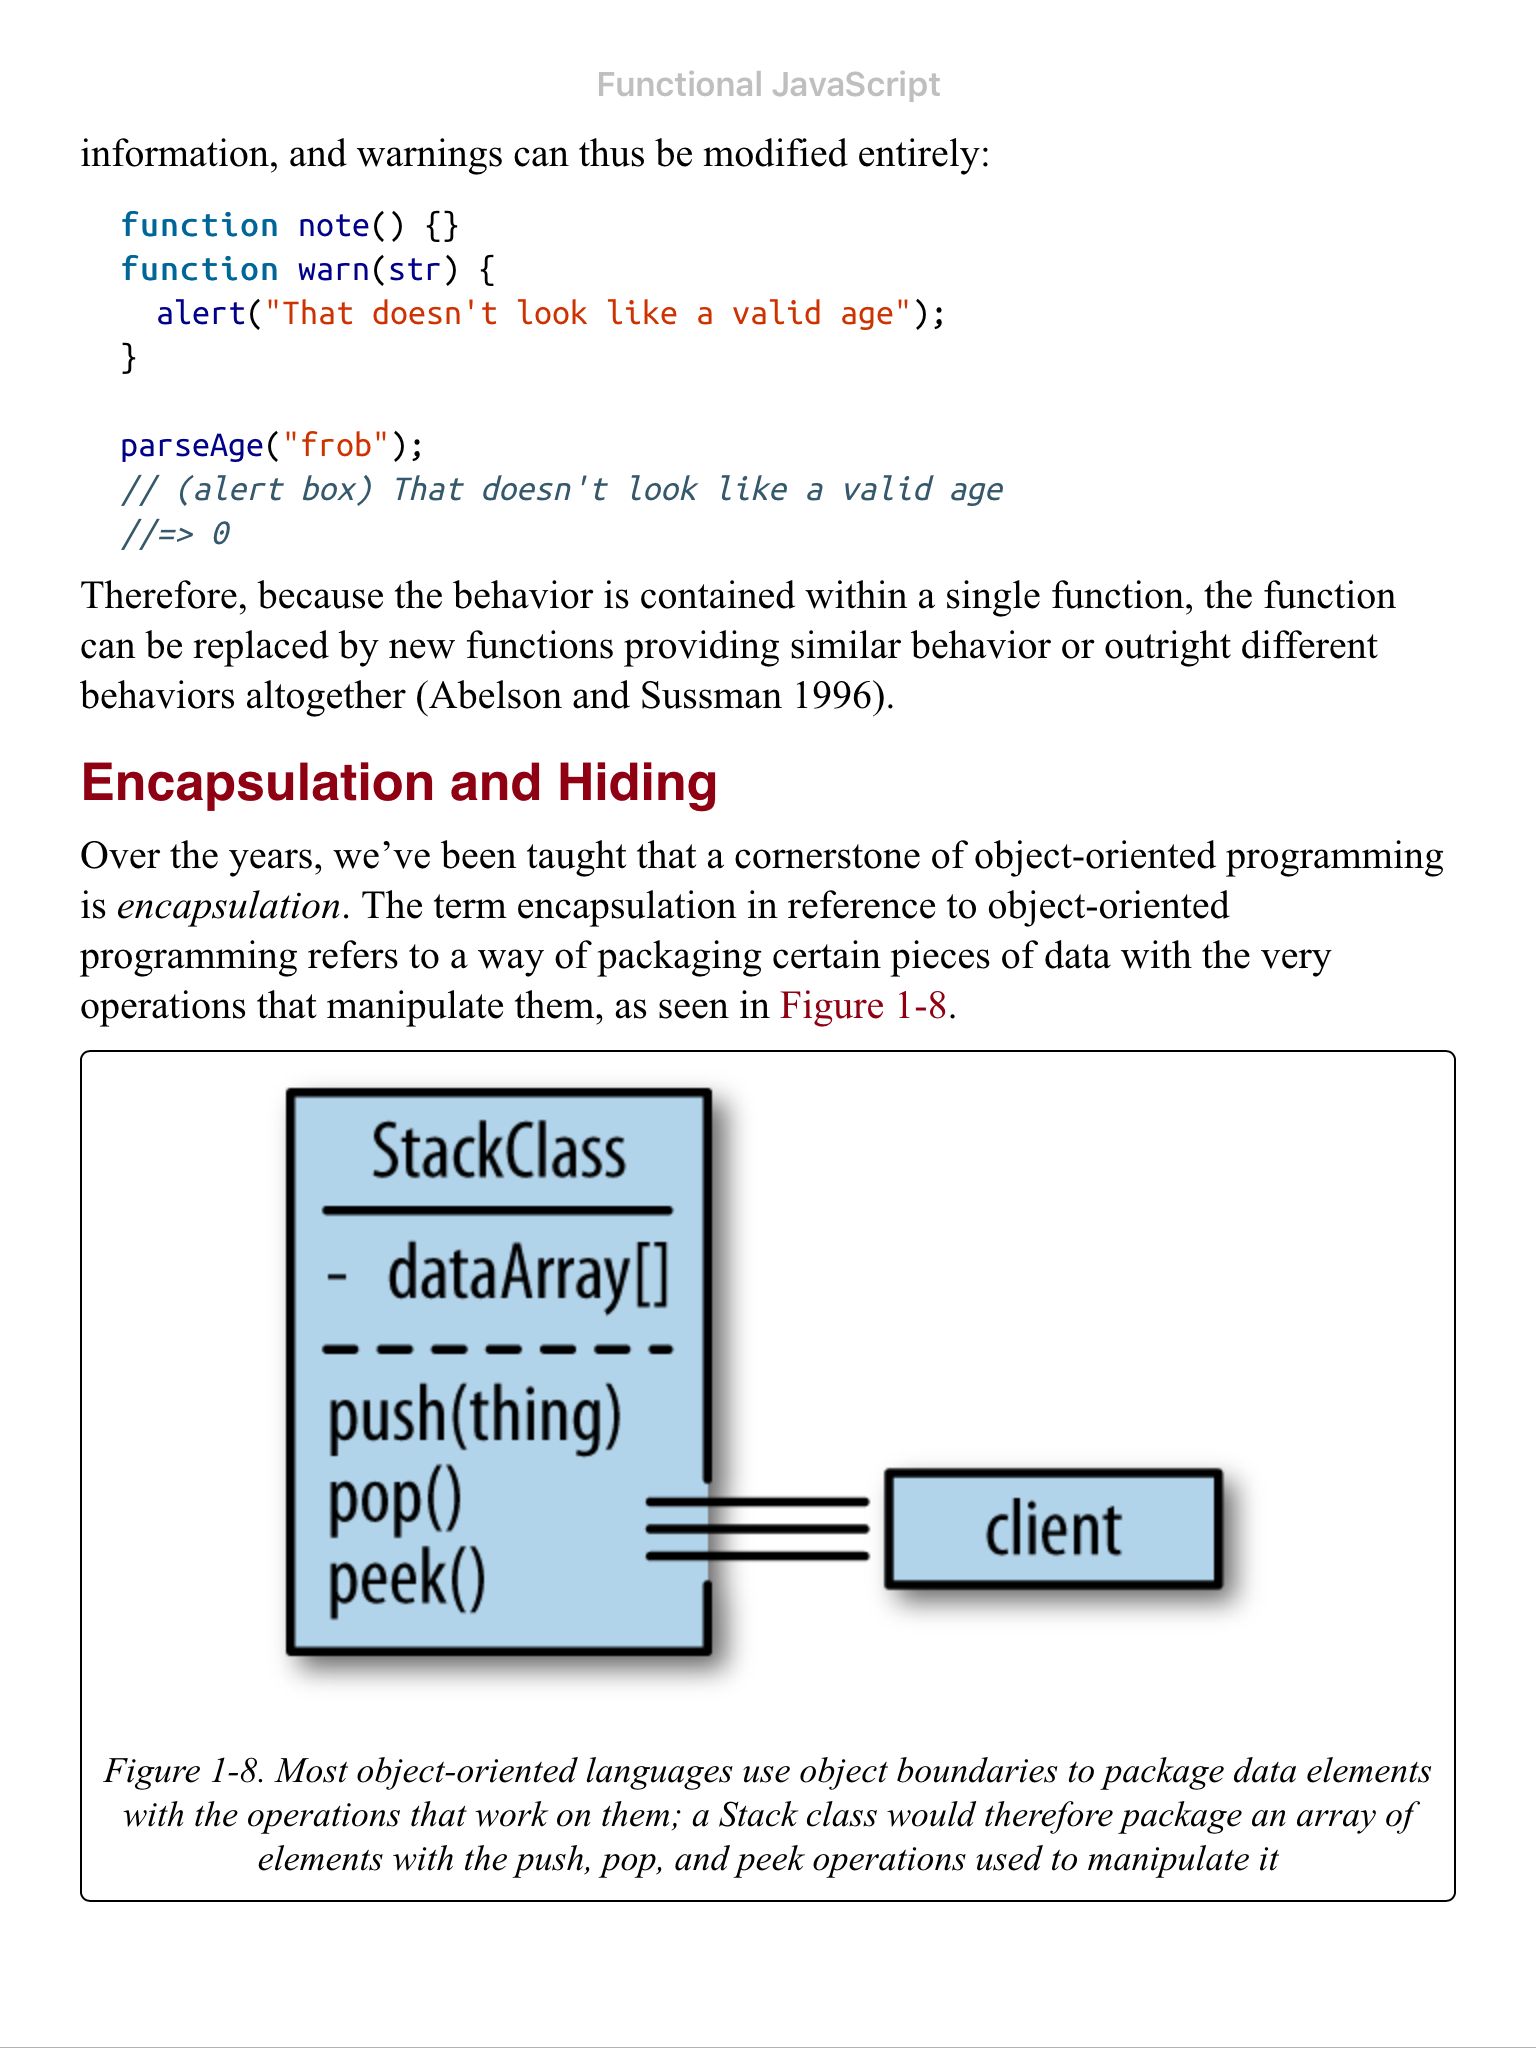 Extract of a Javascript book with figure and code